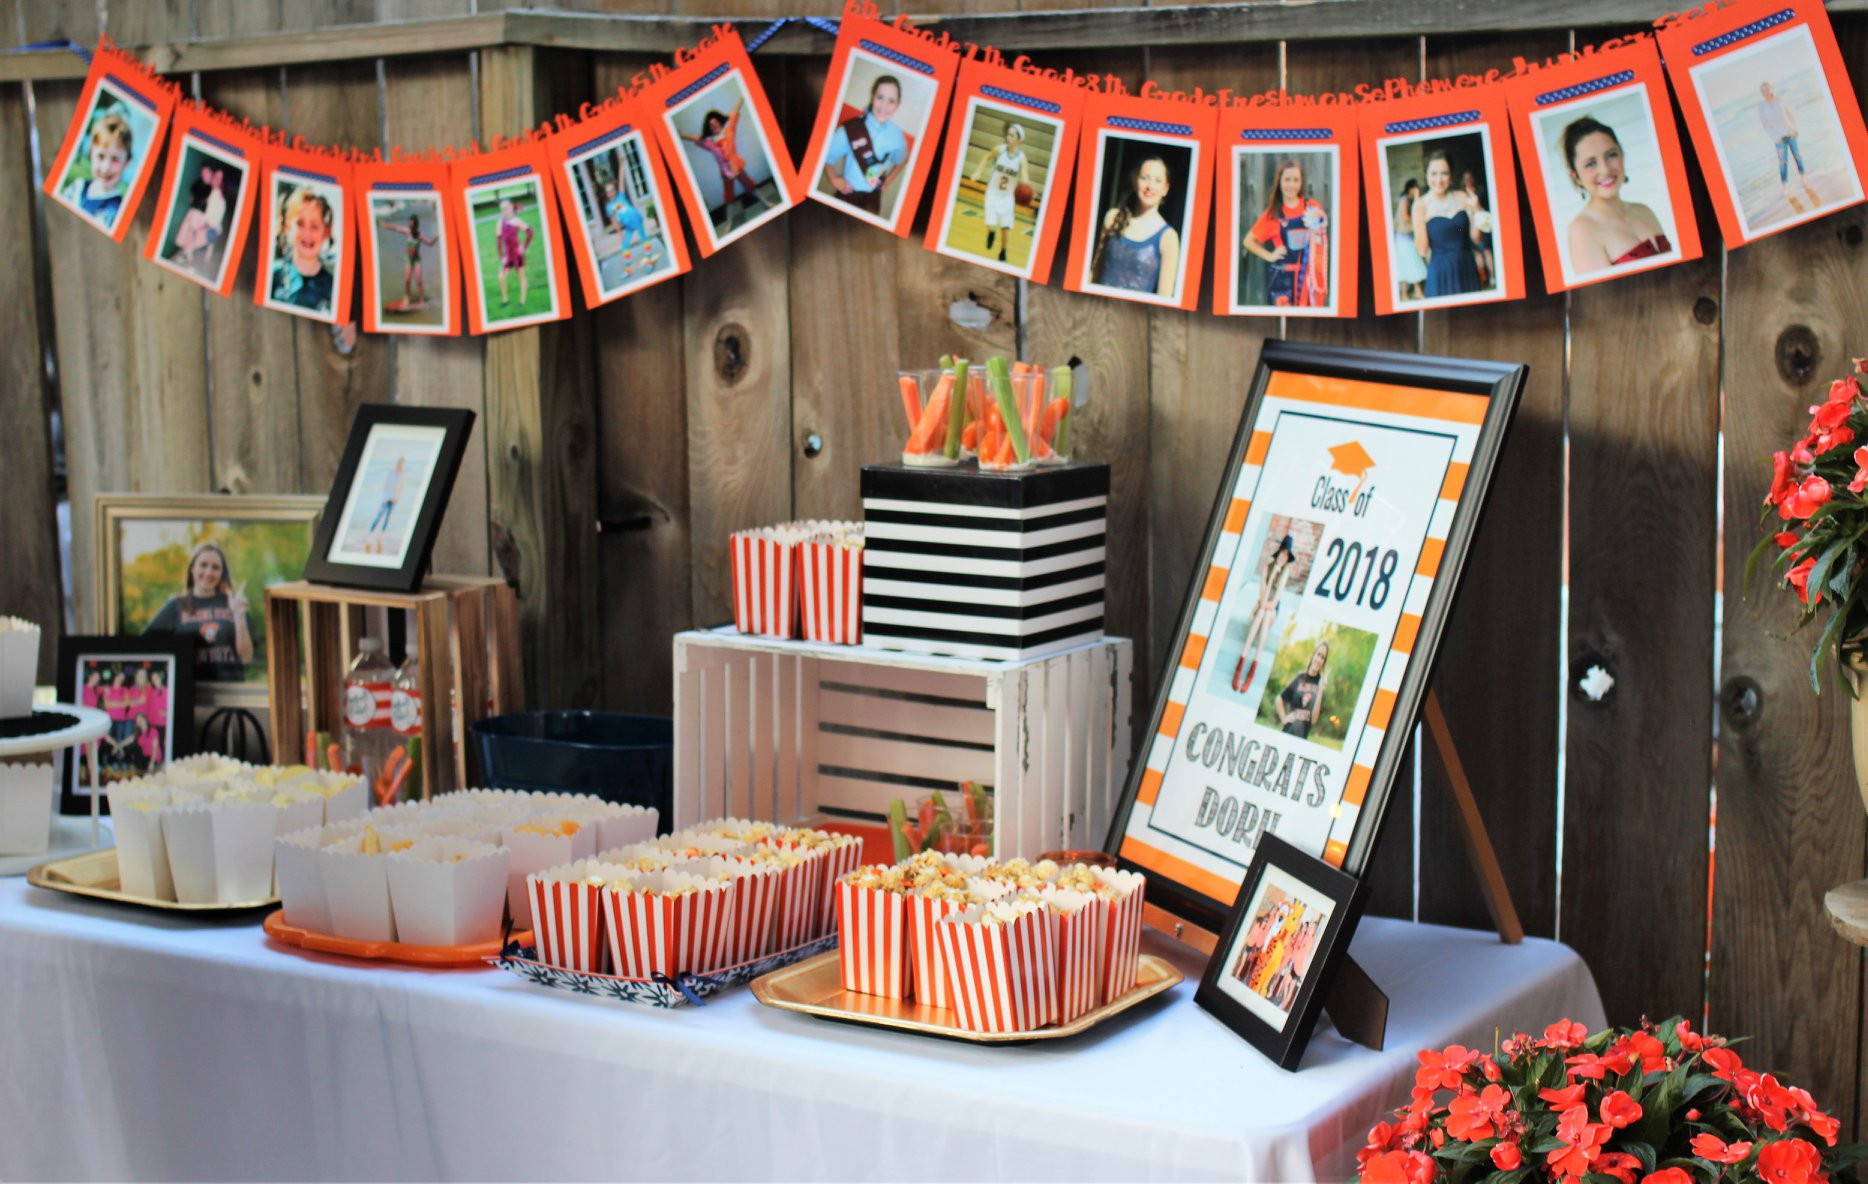 Graduation Ideas For Party
 Graduation Party Ideas How to Celebrate Your Senior s Big Day